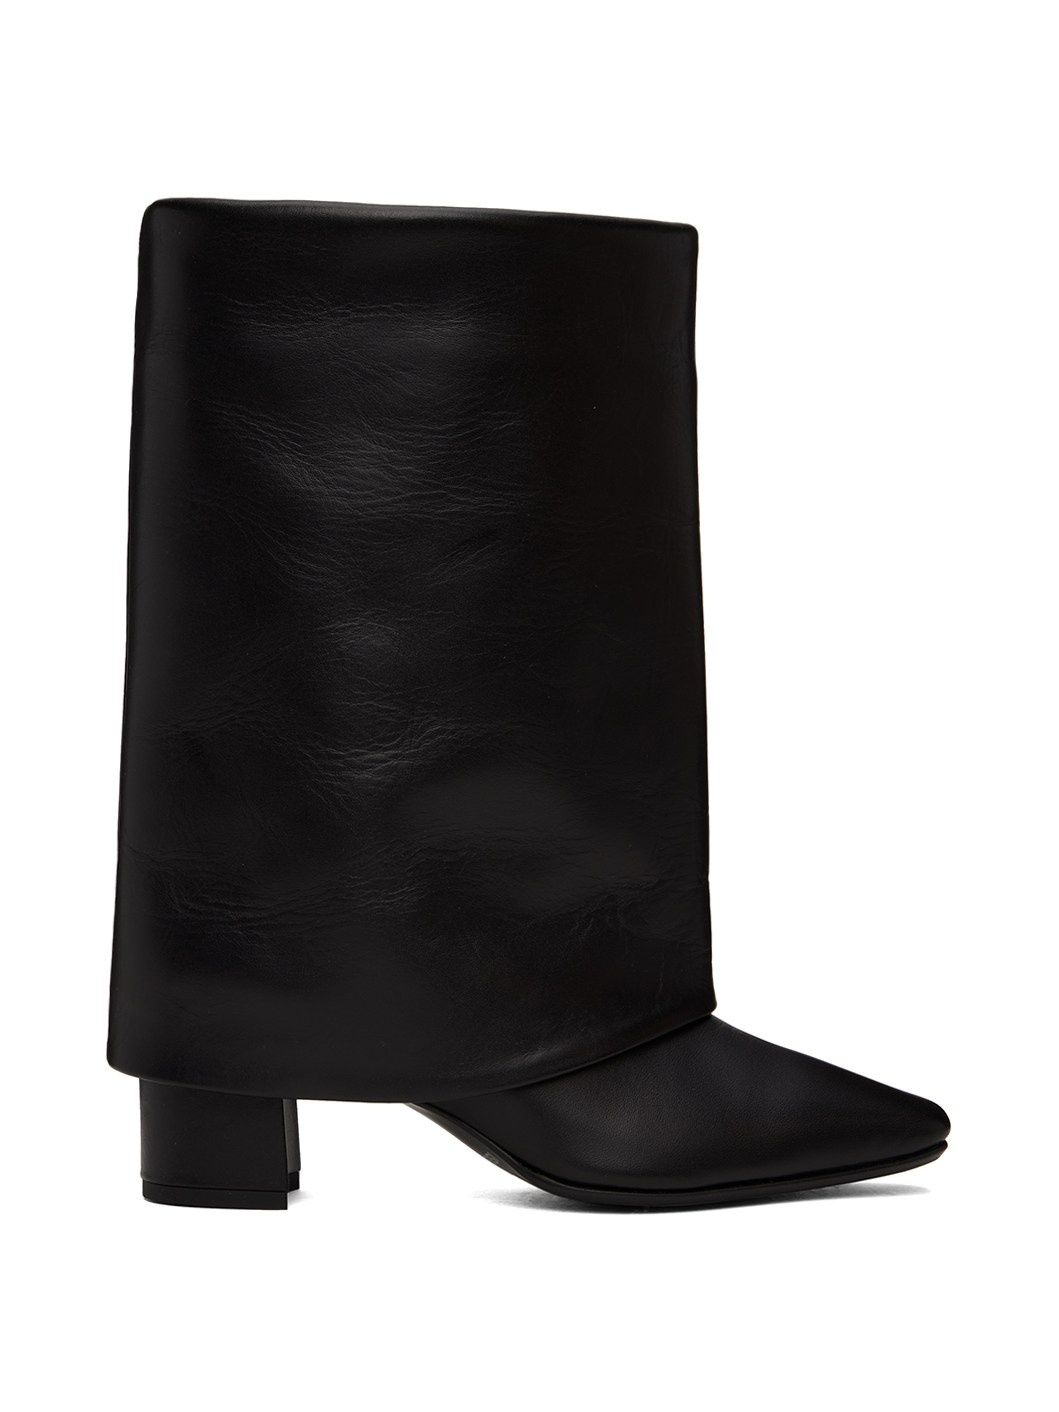 Black Cover Boots - 1